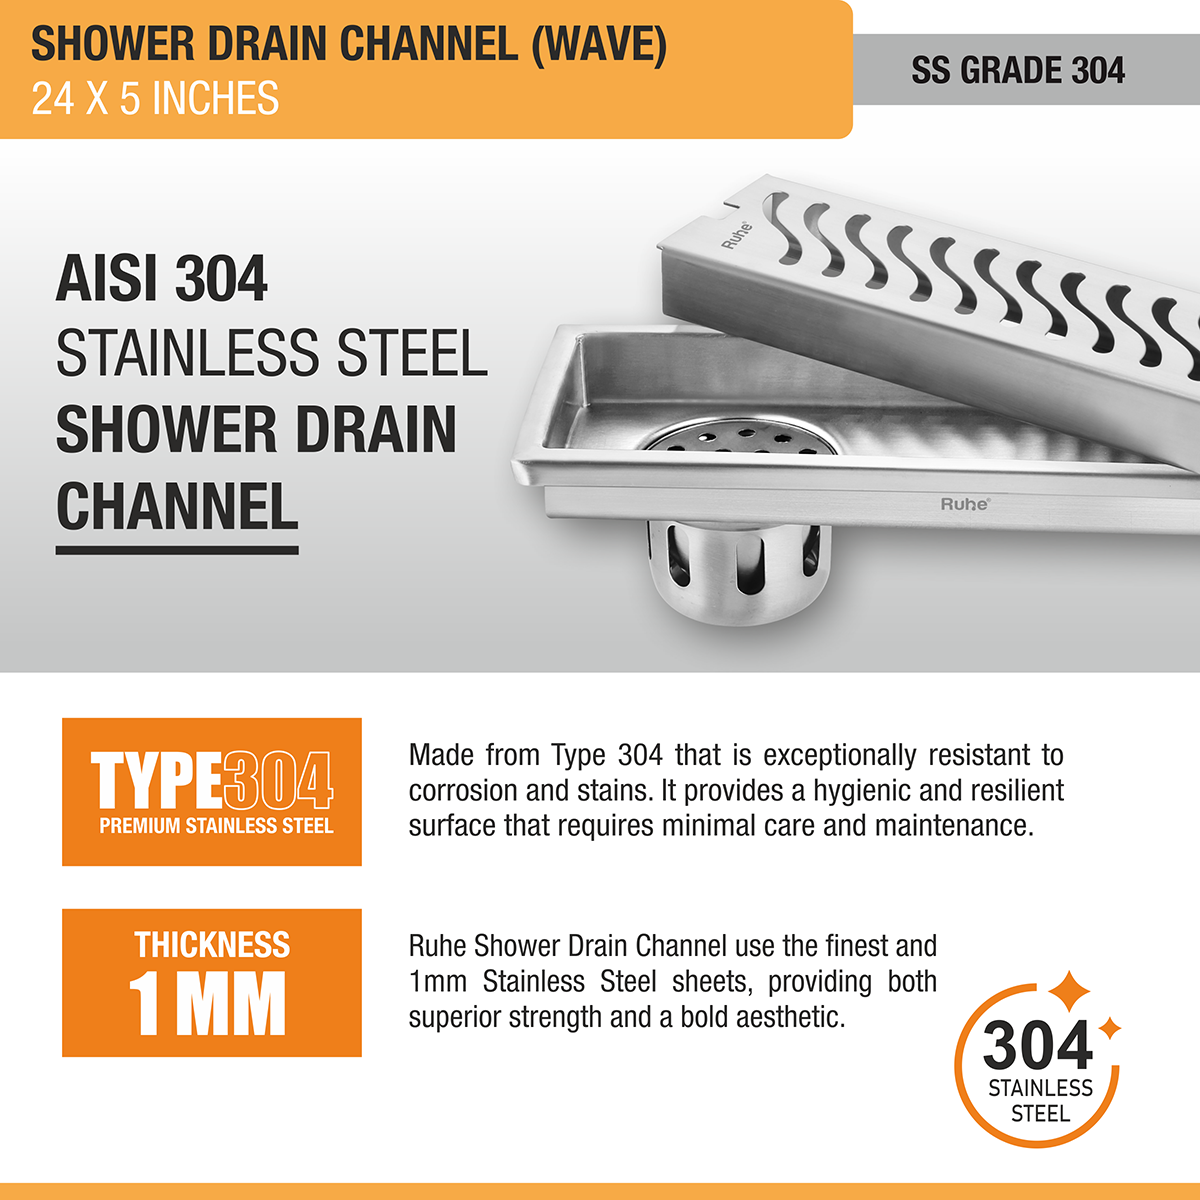 Wave Shower Drain Channel (24 X 5 Inches) with Cockroach Trap (304 Grade) stainless steel